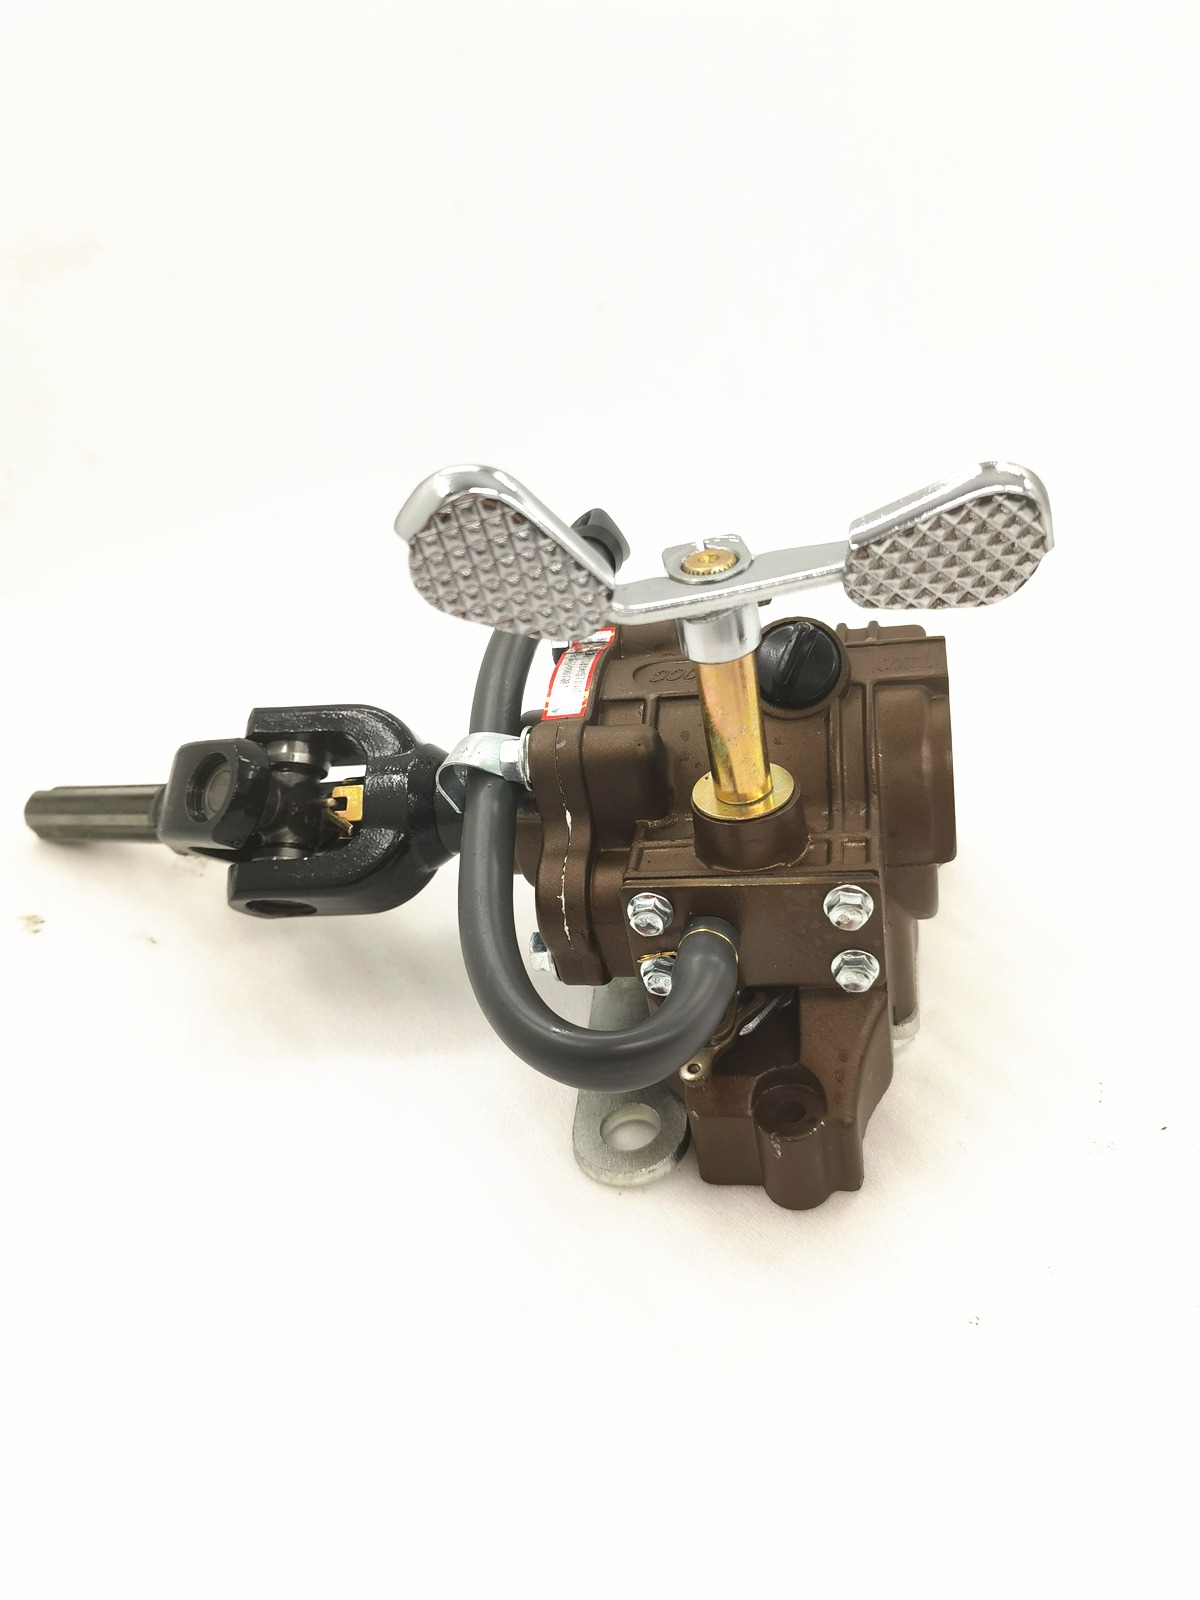 DAYANG exquisite ChuanYu 280 reverse gear box  for Lifan Engine Motor Trike 3 Wheel Motorcycle Tricycle with big size base plate